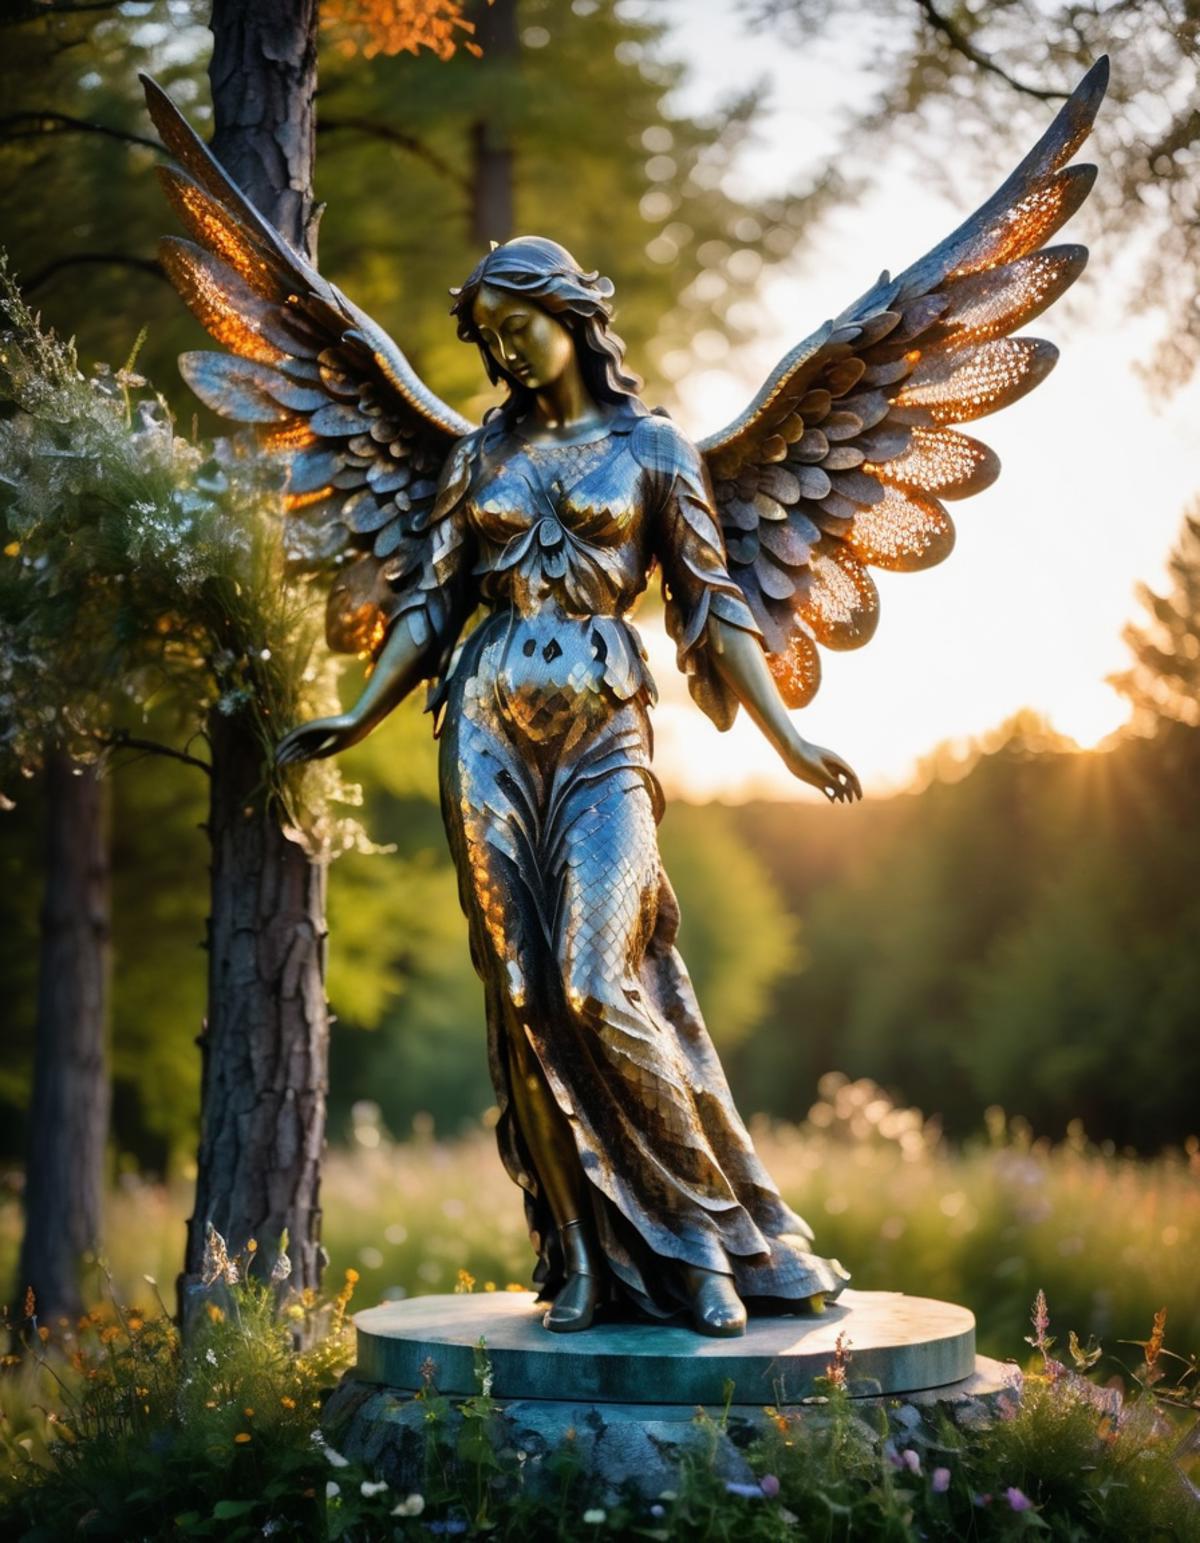 A statue of a woman with wings, possibly an angel, in a garden setting.